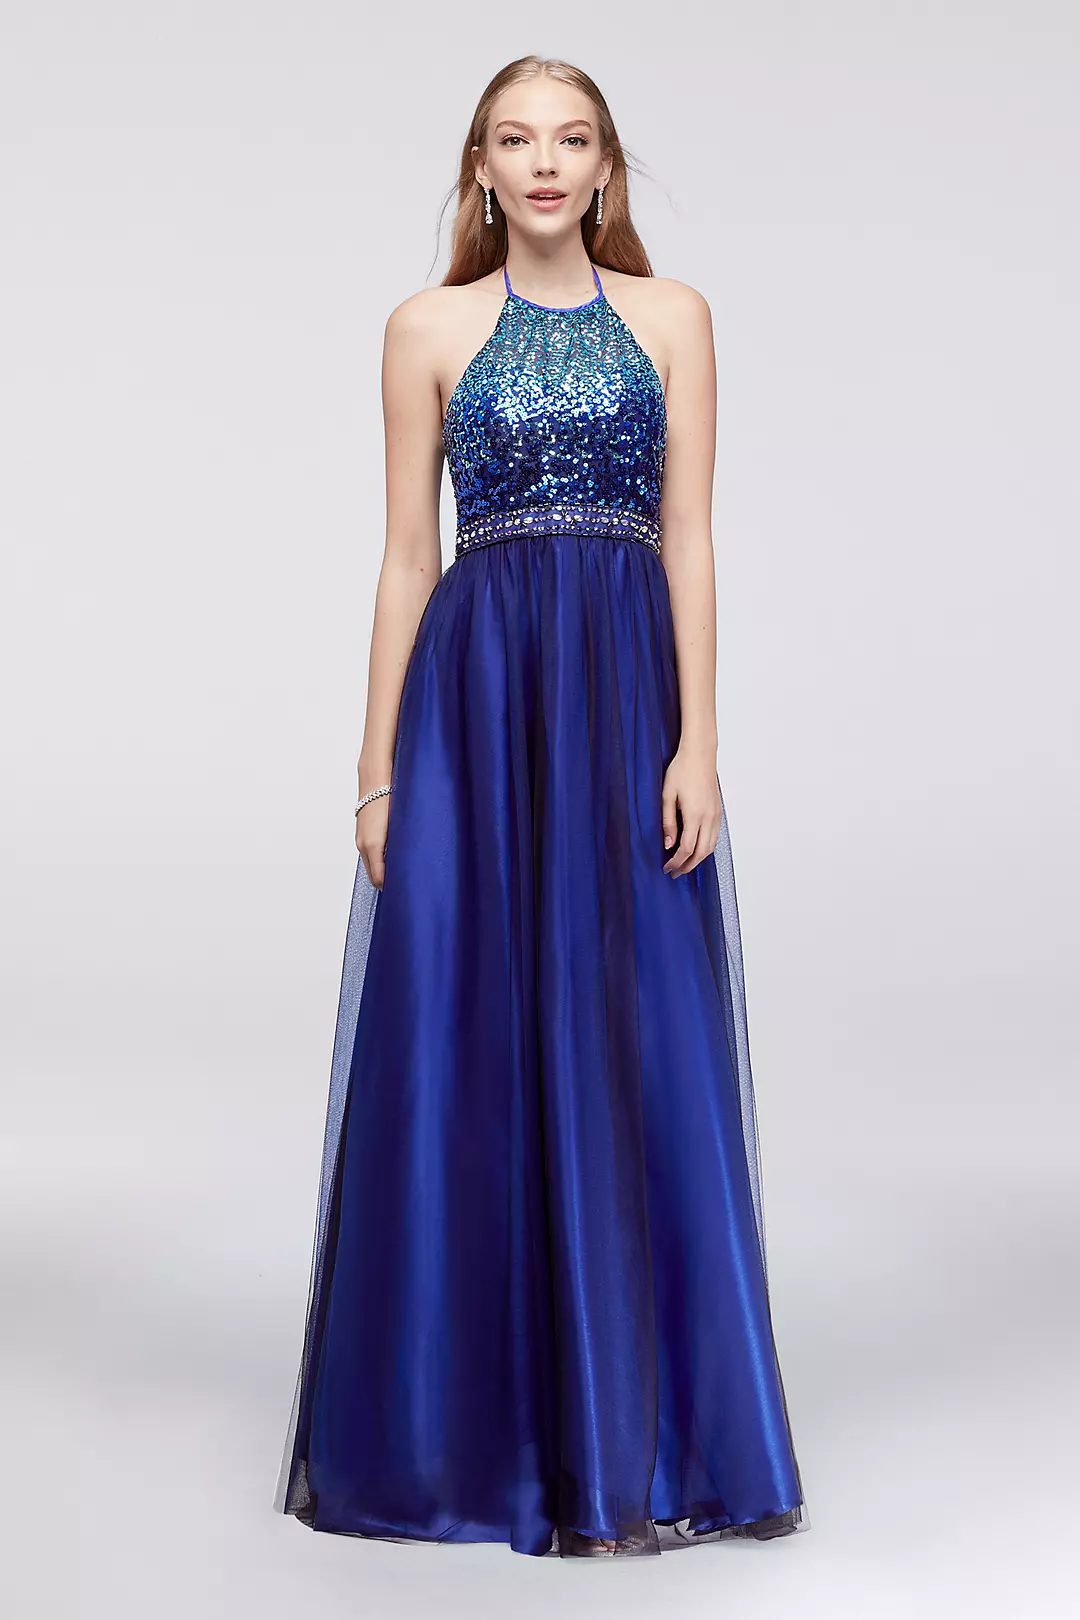 Ombre Sequin Halter Dress with Beaded Waist Image